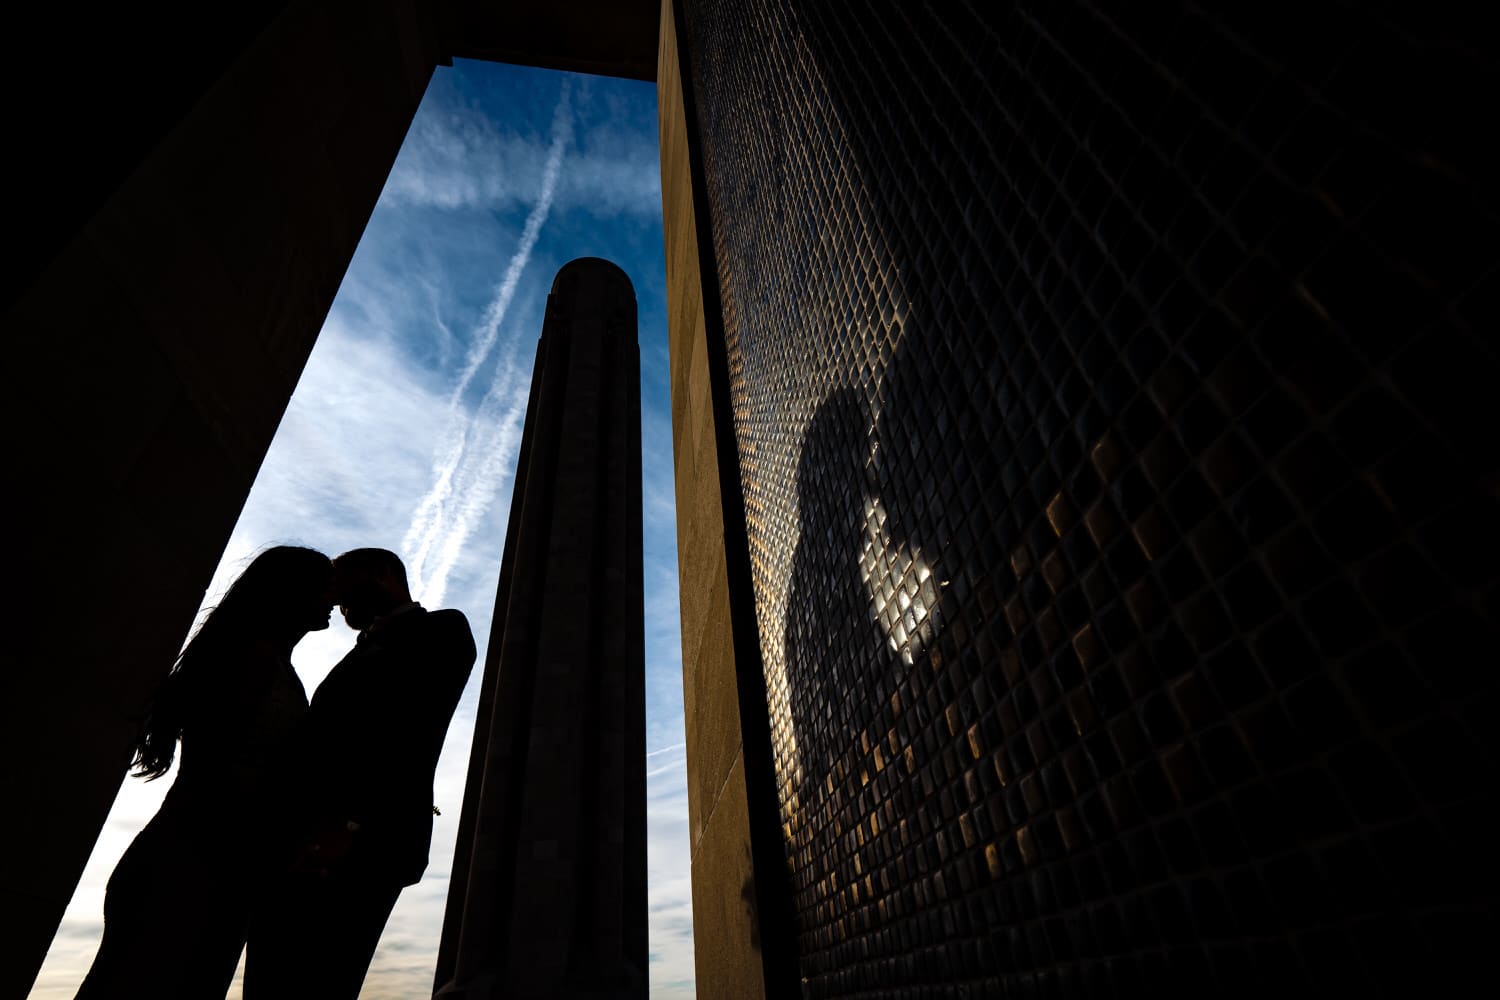 A silhouette of a bride and groom leaning in to share a kiss with the silhouette of Liberty Memorial visible in the background. 